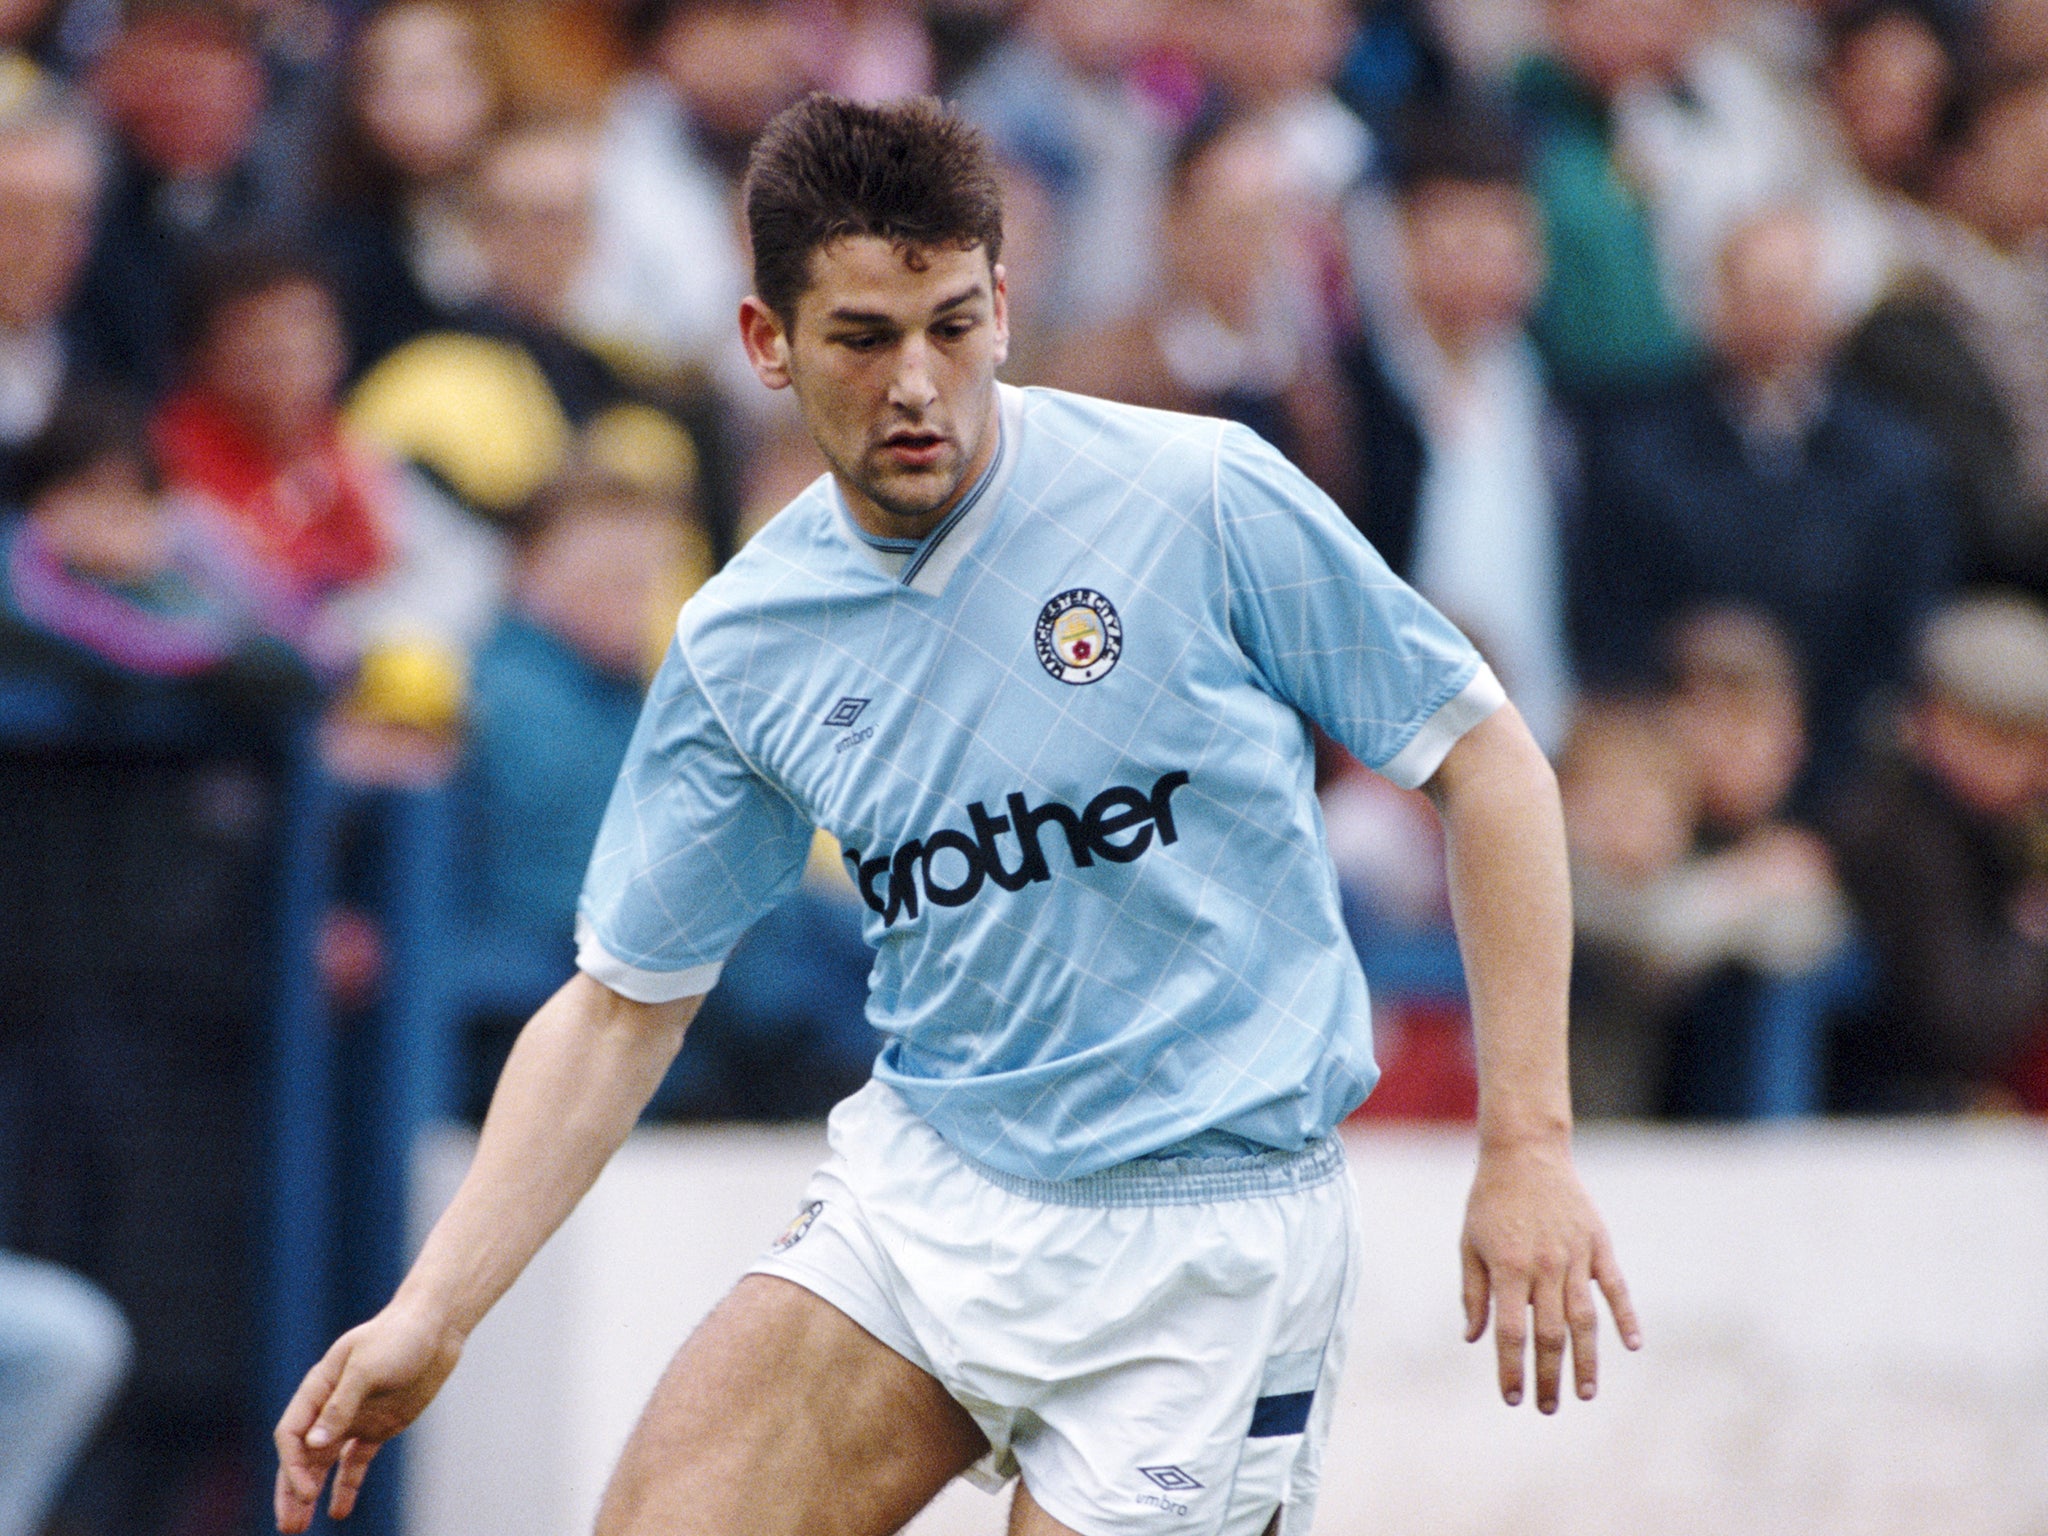 White playing for City during the 1988/89 season